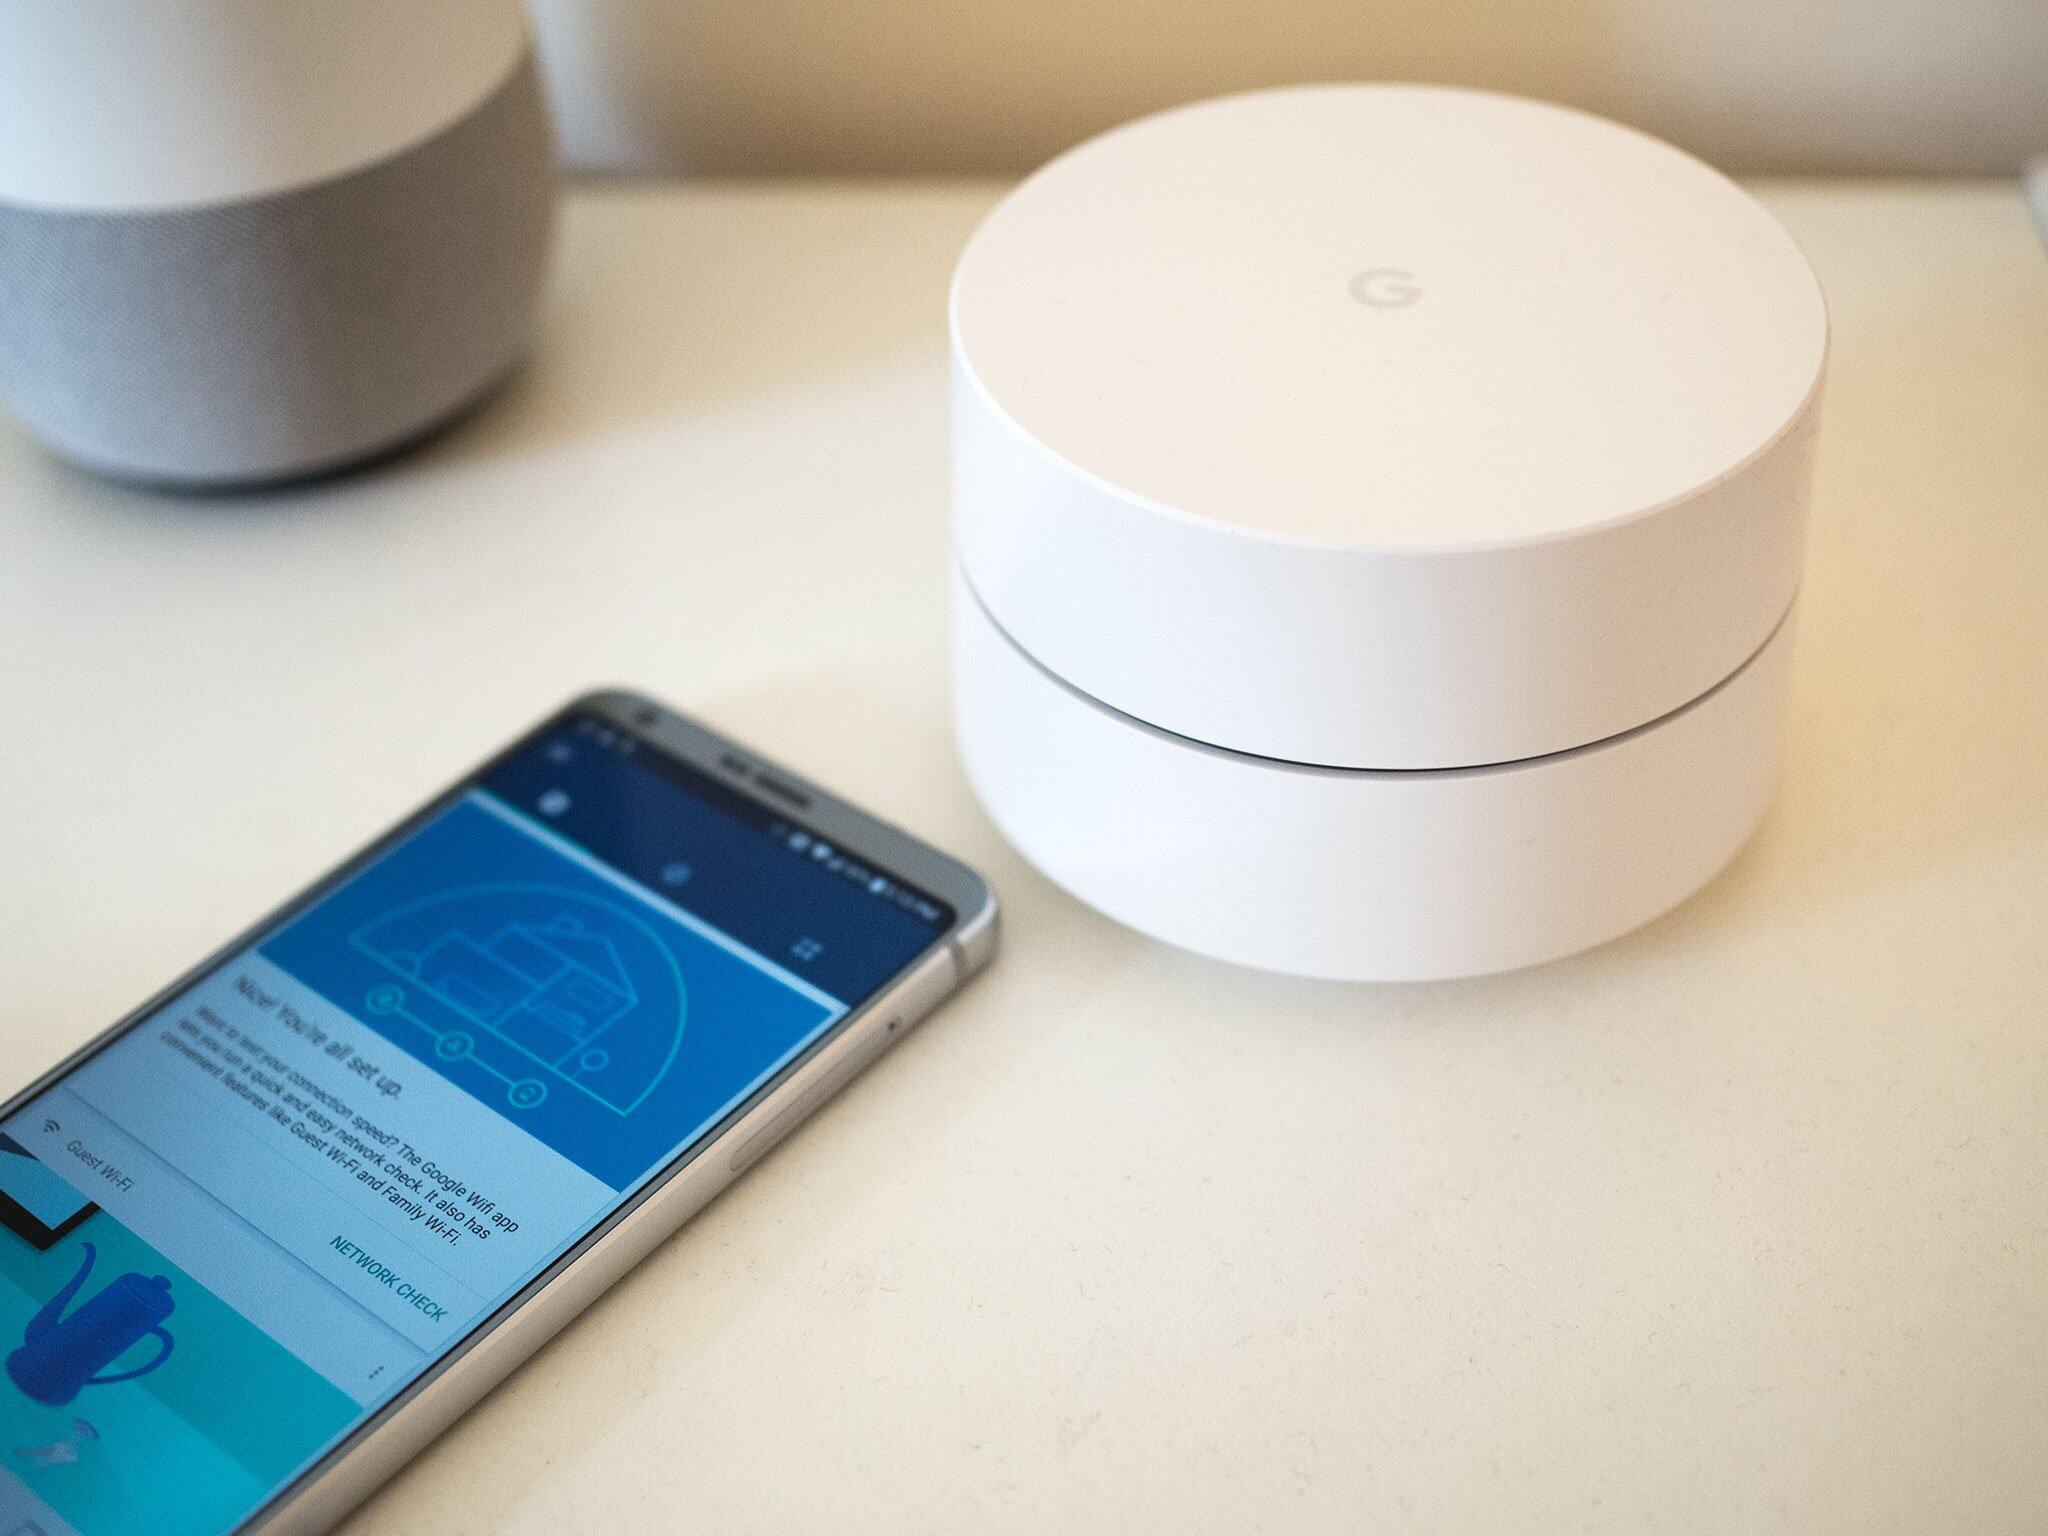 How To Add Google Wi-Fi To Google Home